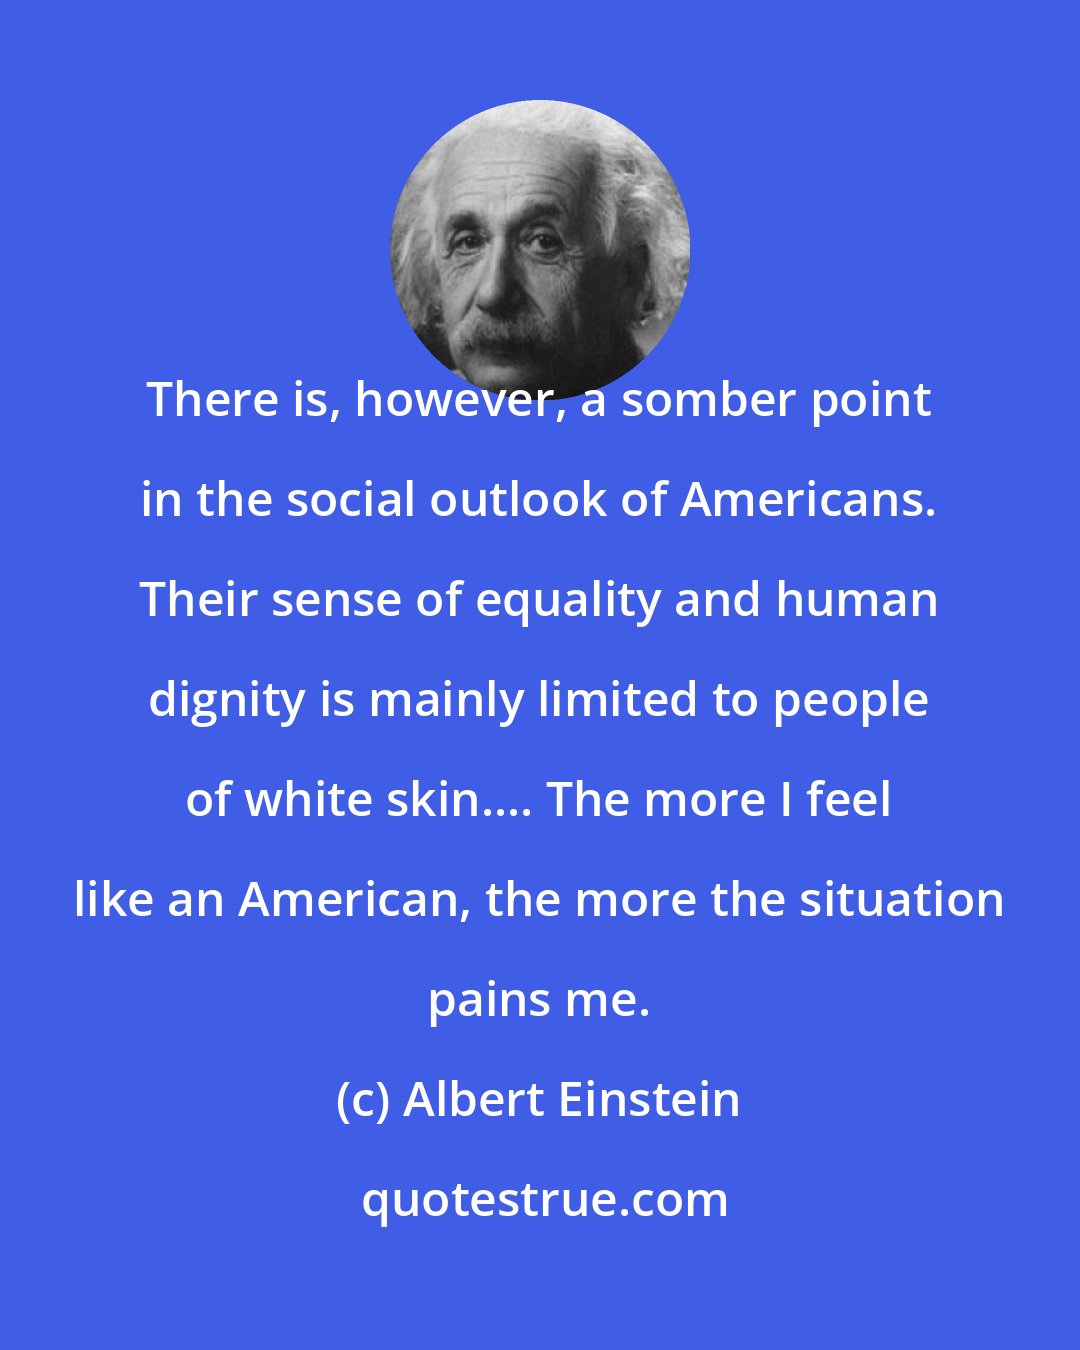 Albert Einstein: There is, however, a somber point in the social outlook of Americans. Their sense of equality and human dignity is mainly limited to people of white skin.... The more I feel like an American, the more the situation pains me.